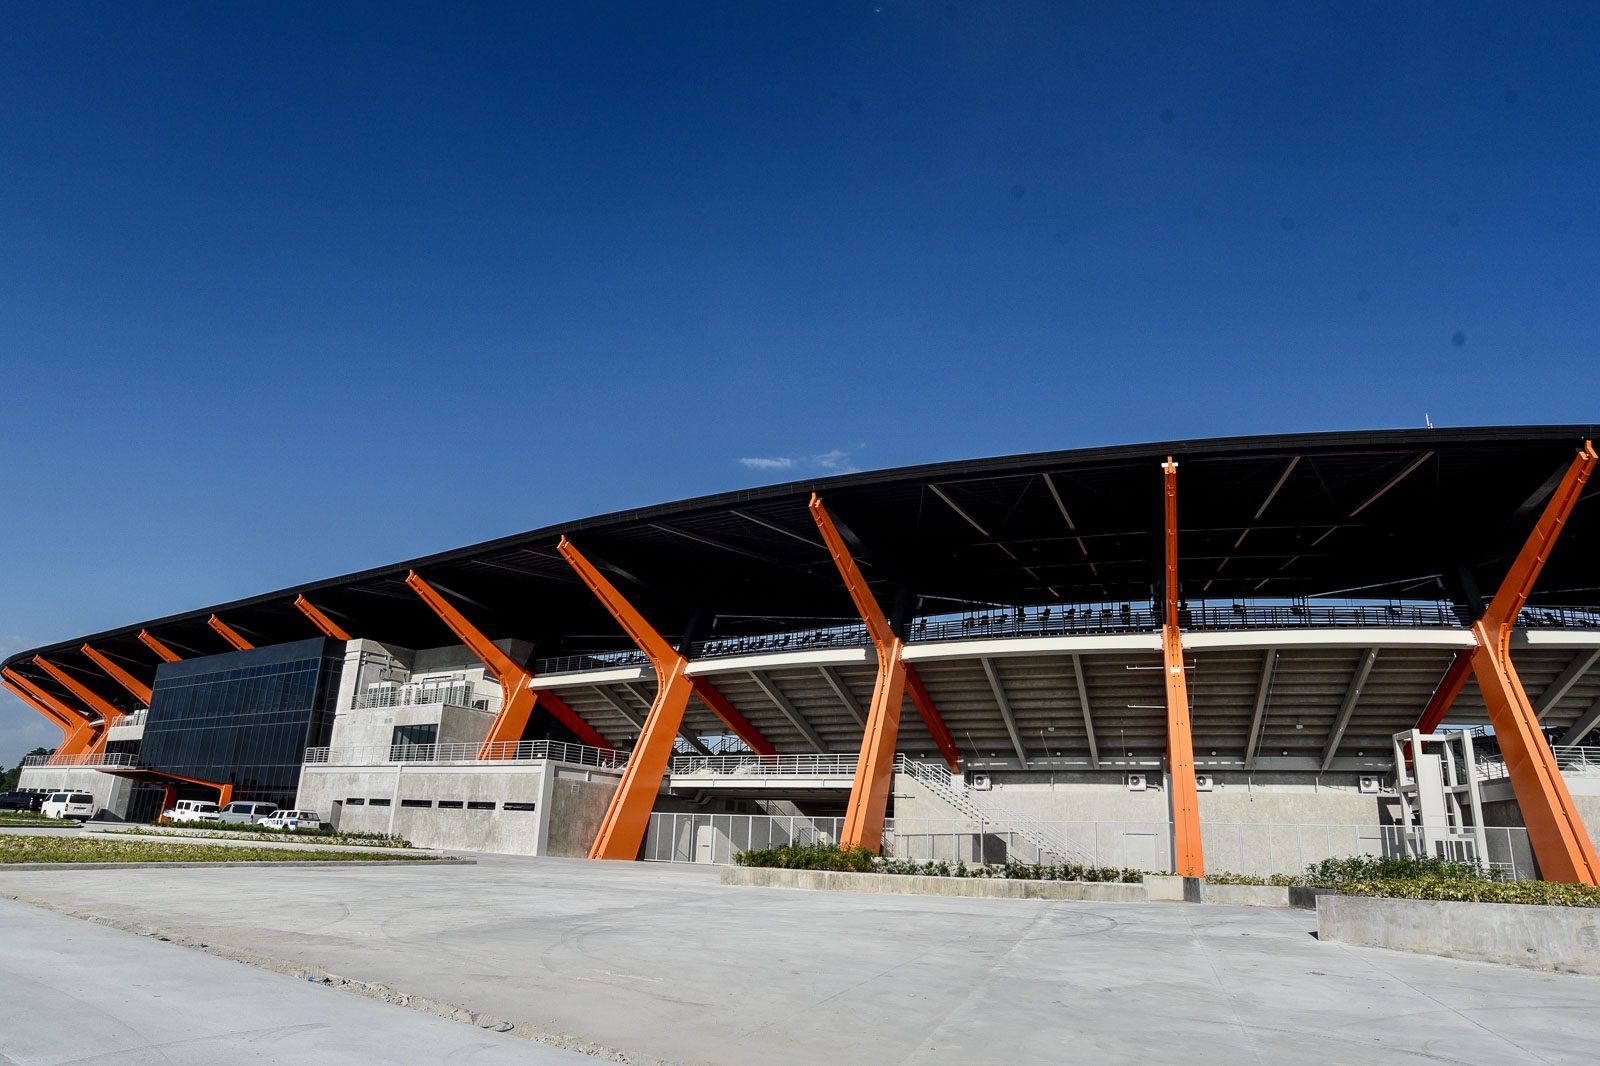 PINATUBO-INSPIRED. The design of the athletics stadium is inspired by the crater of Mt Pinatubo, the contours of the Sierra Madre mountain ranges, and the classic Filipino parol or Christmas lantern. Photo by Angie de Silva/Rappler  